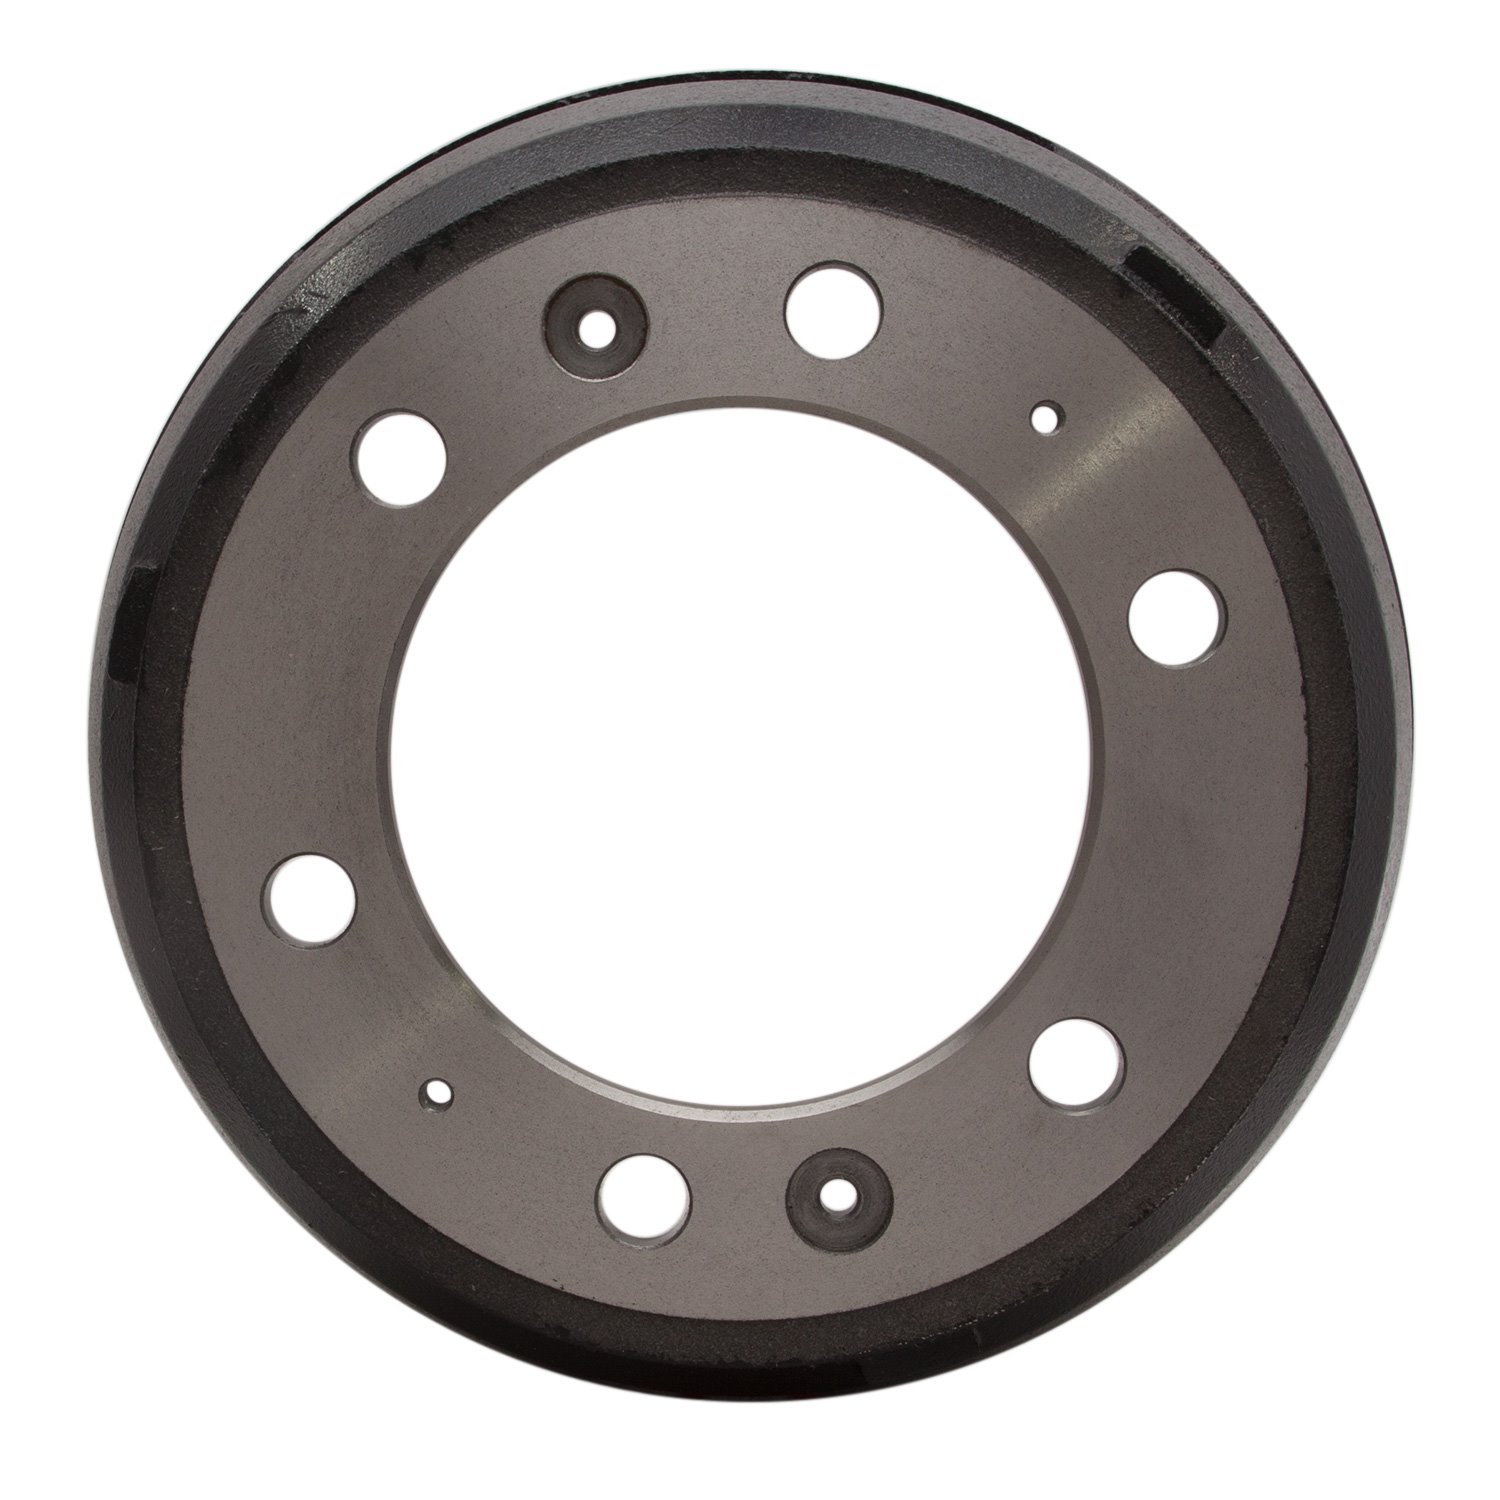 Brake Drum, Fits Select GM, Position: Rear